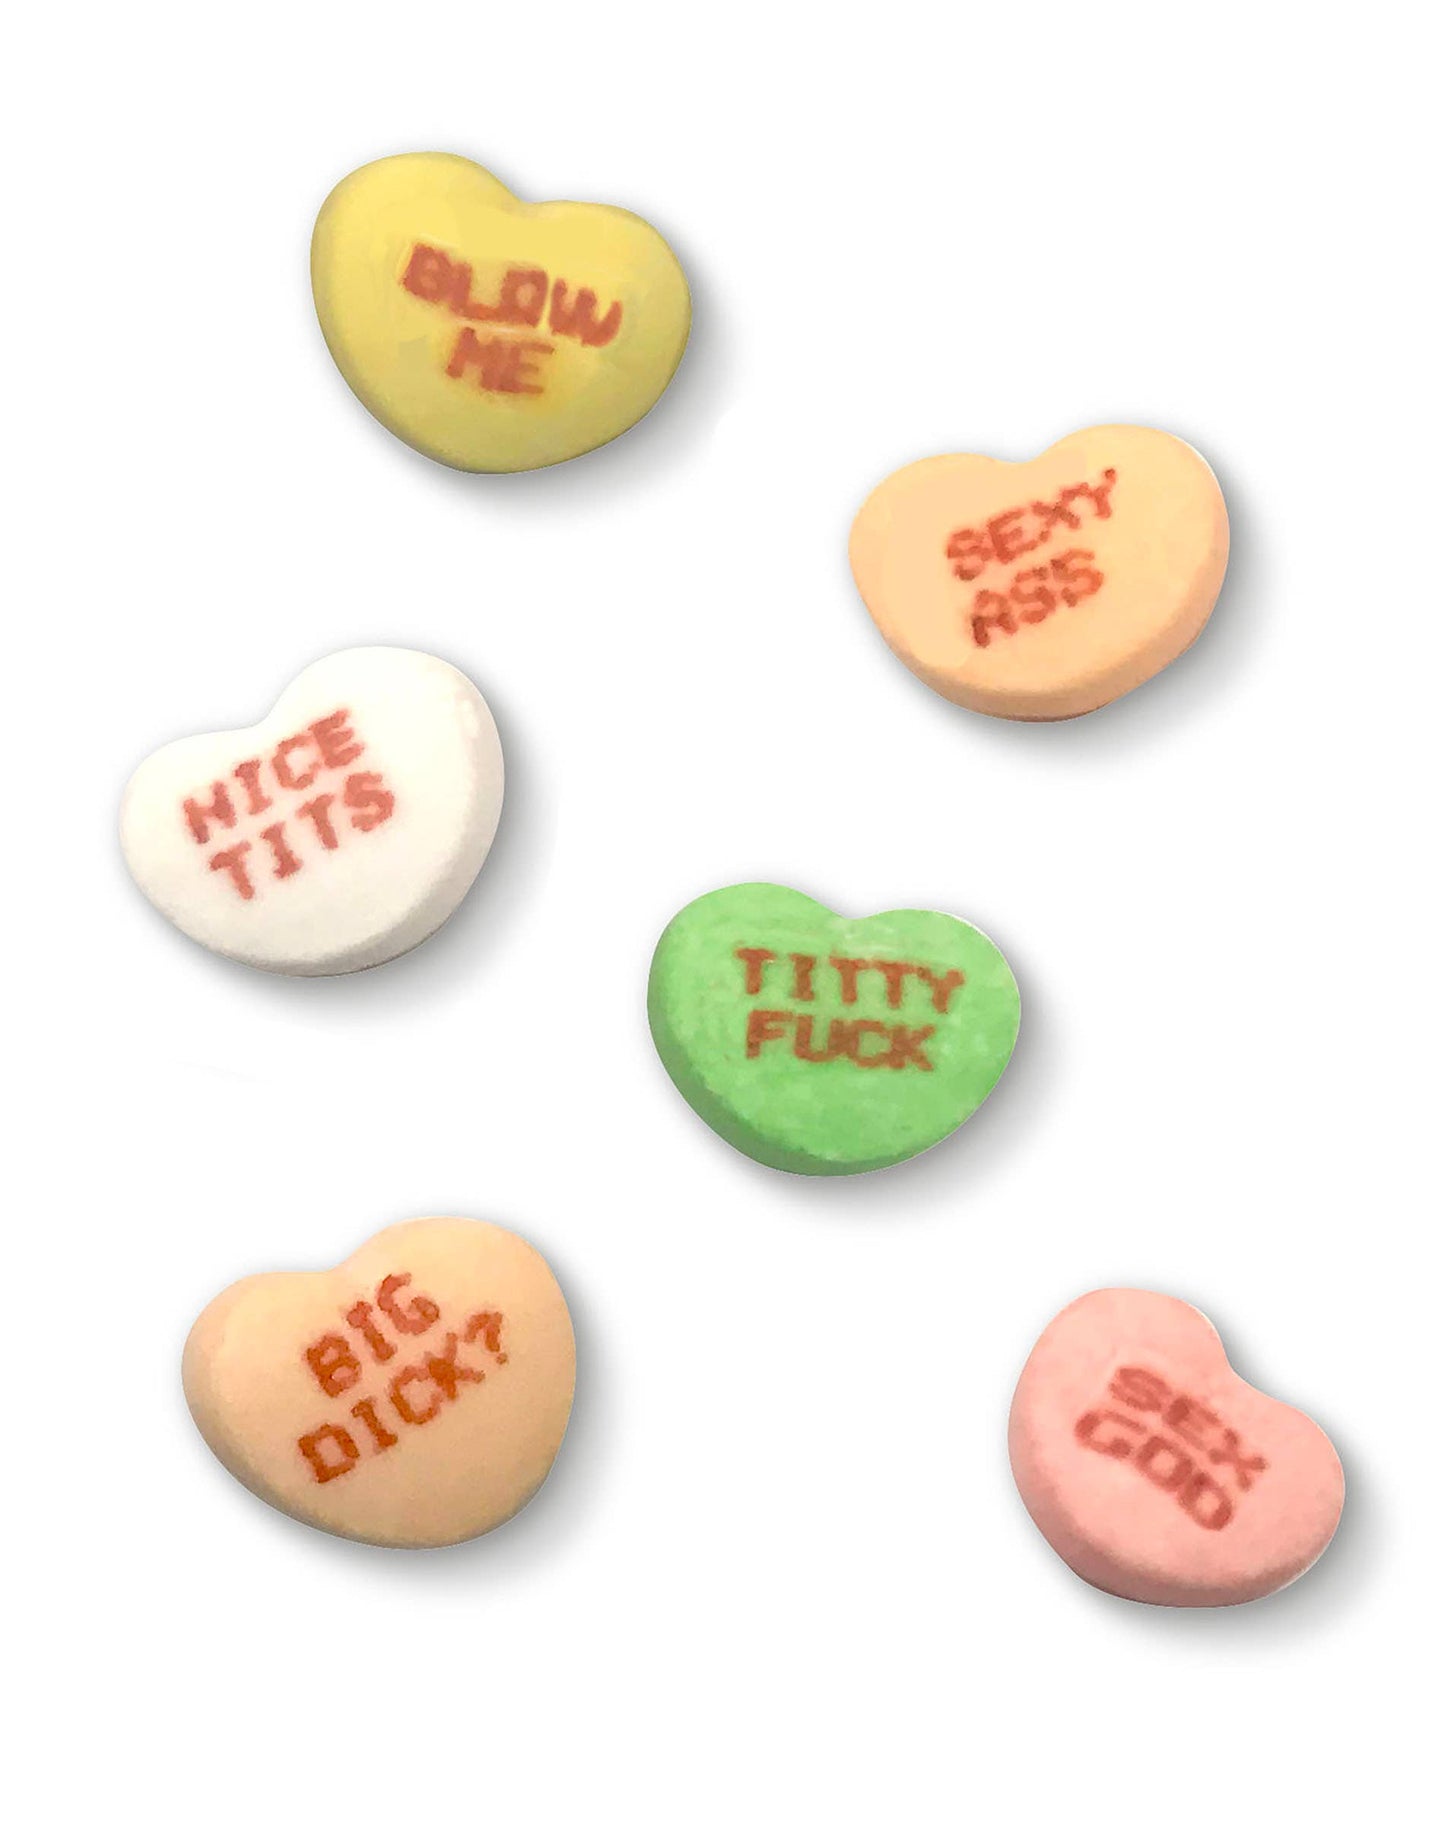 X-Rated Valentine's Conversation Candy Hearts- 6 Pk Display